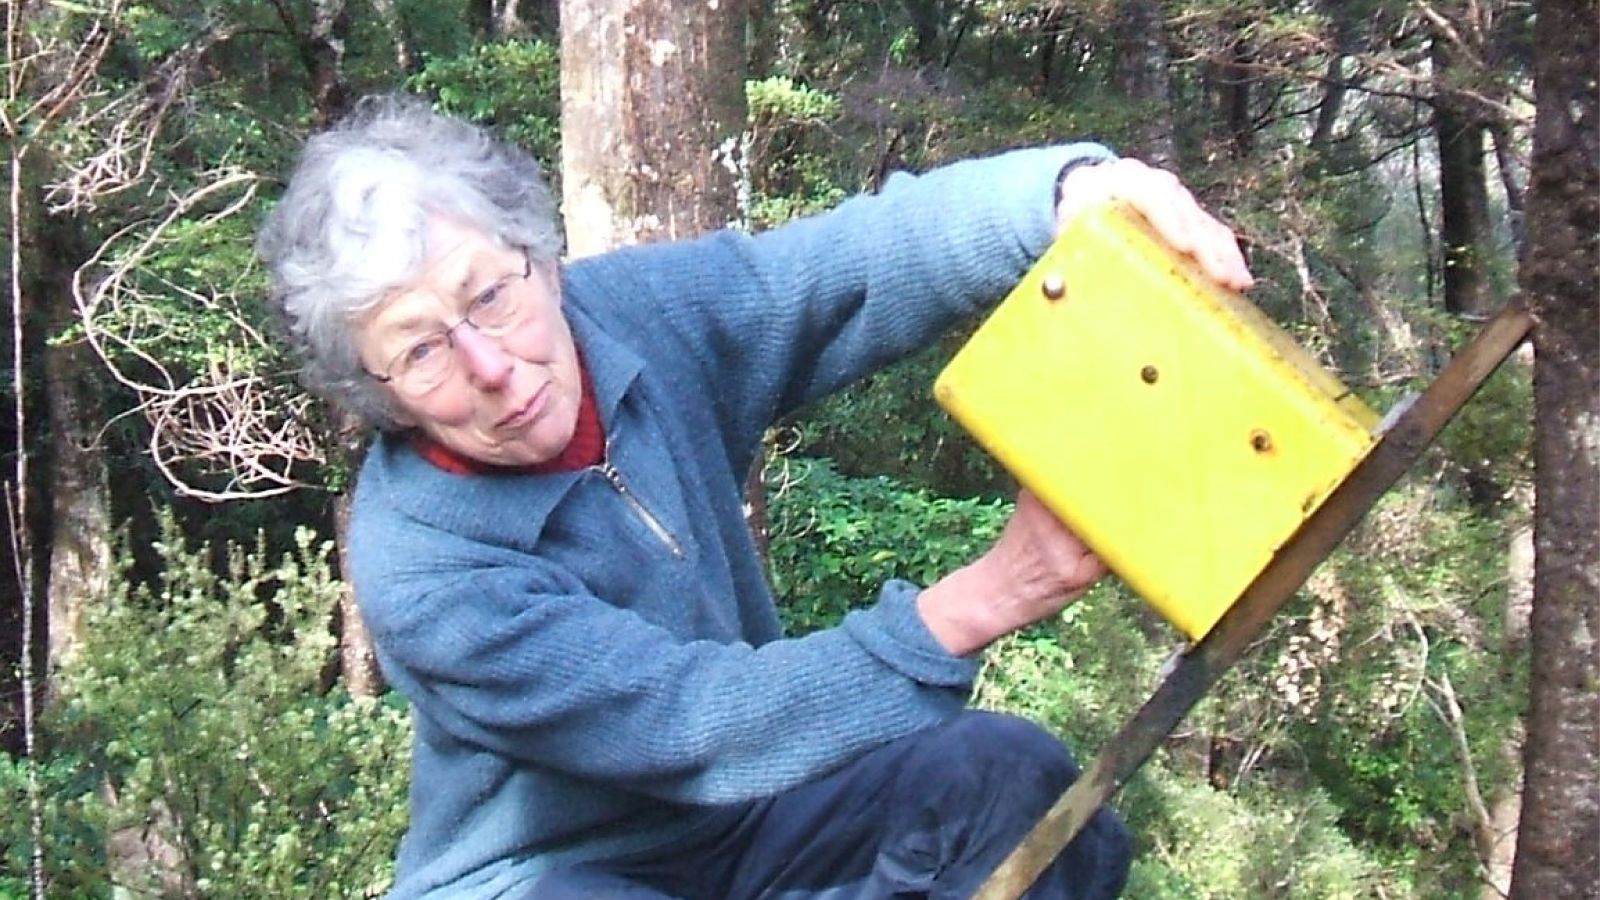 Jan Heine holds a yellow trap for rats and possums in the bush